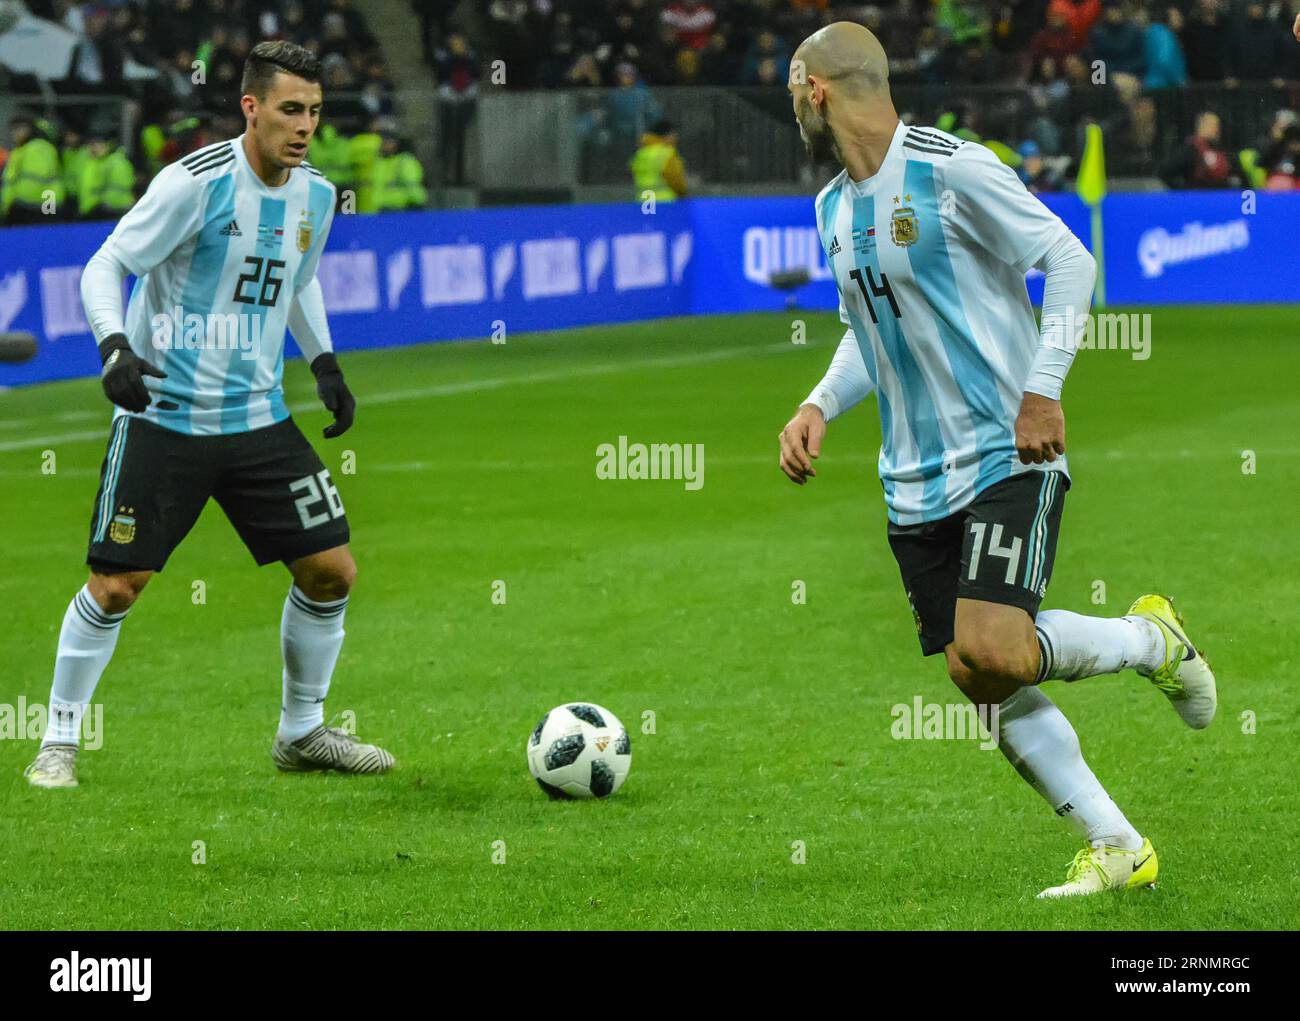 Moscow, Russia – November 11, 2017. Argentina national football team winger Cristian Pavon during international friendly Russia vs Argentina (0-1) Stock Photo